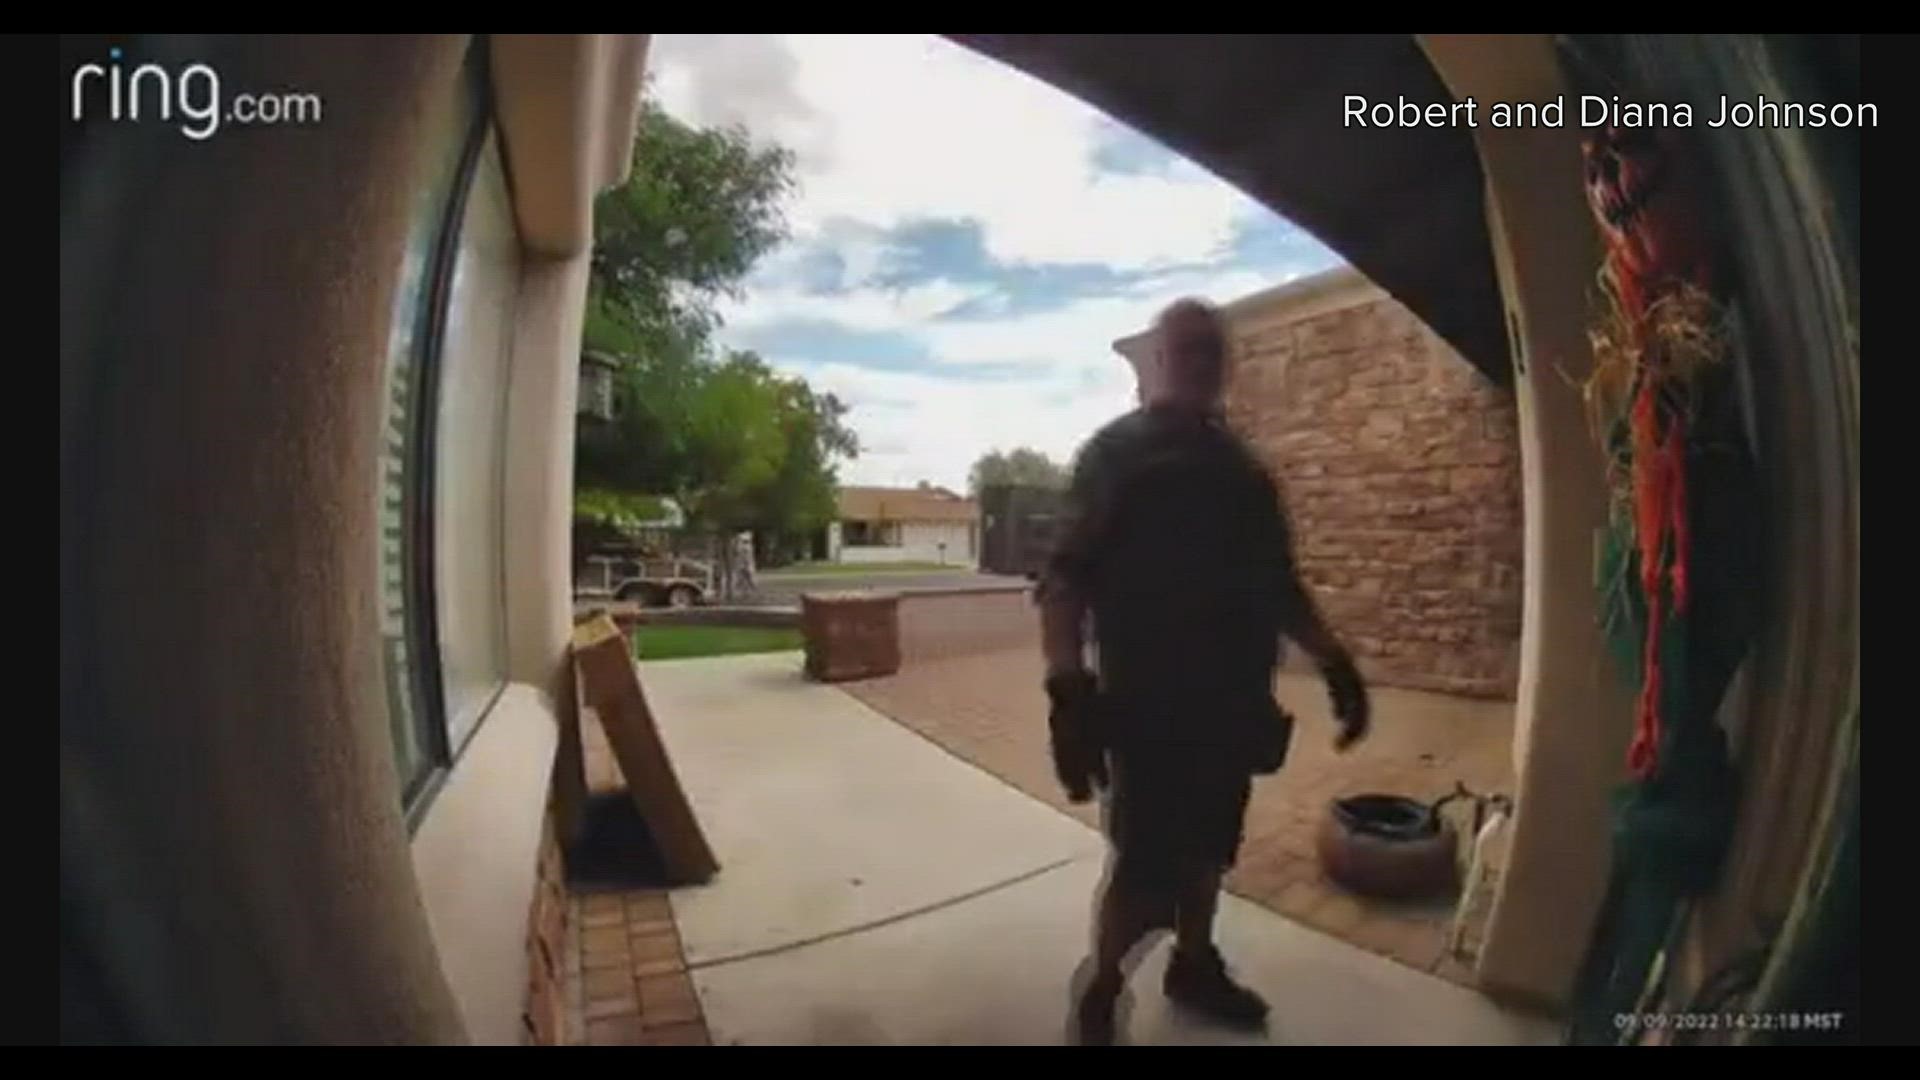 Another carrier had left the package out in an unsafe spot, so this postman decided to help out.